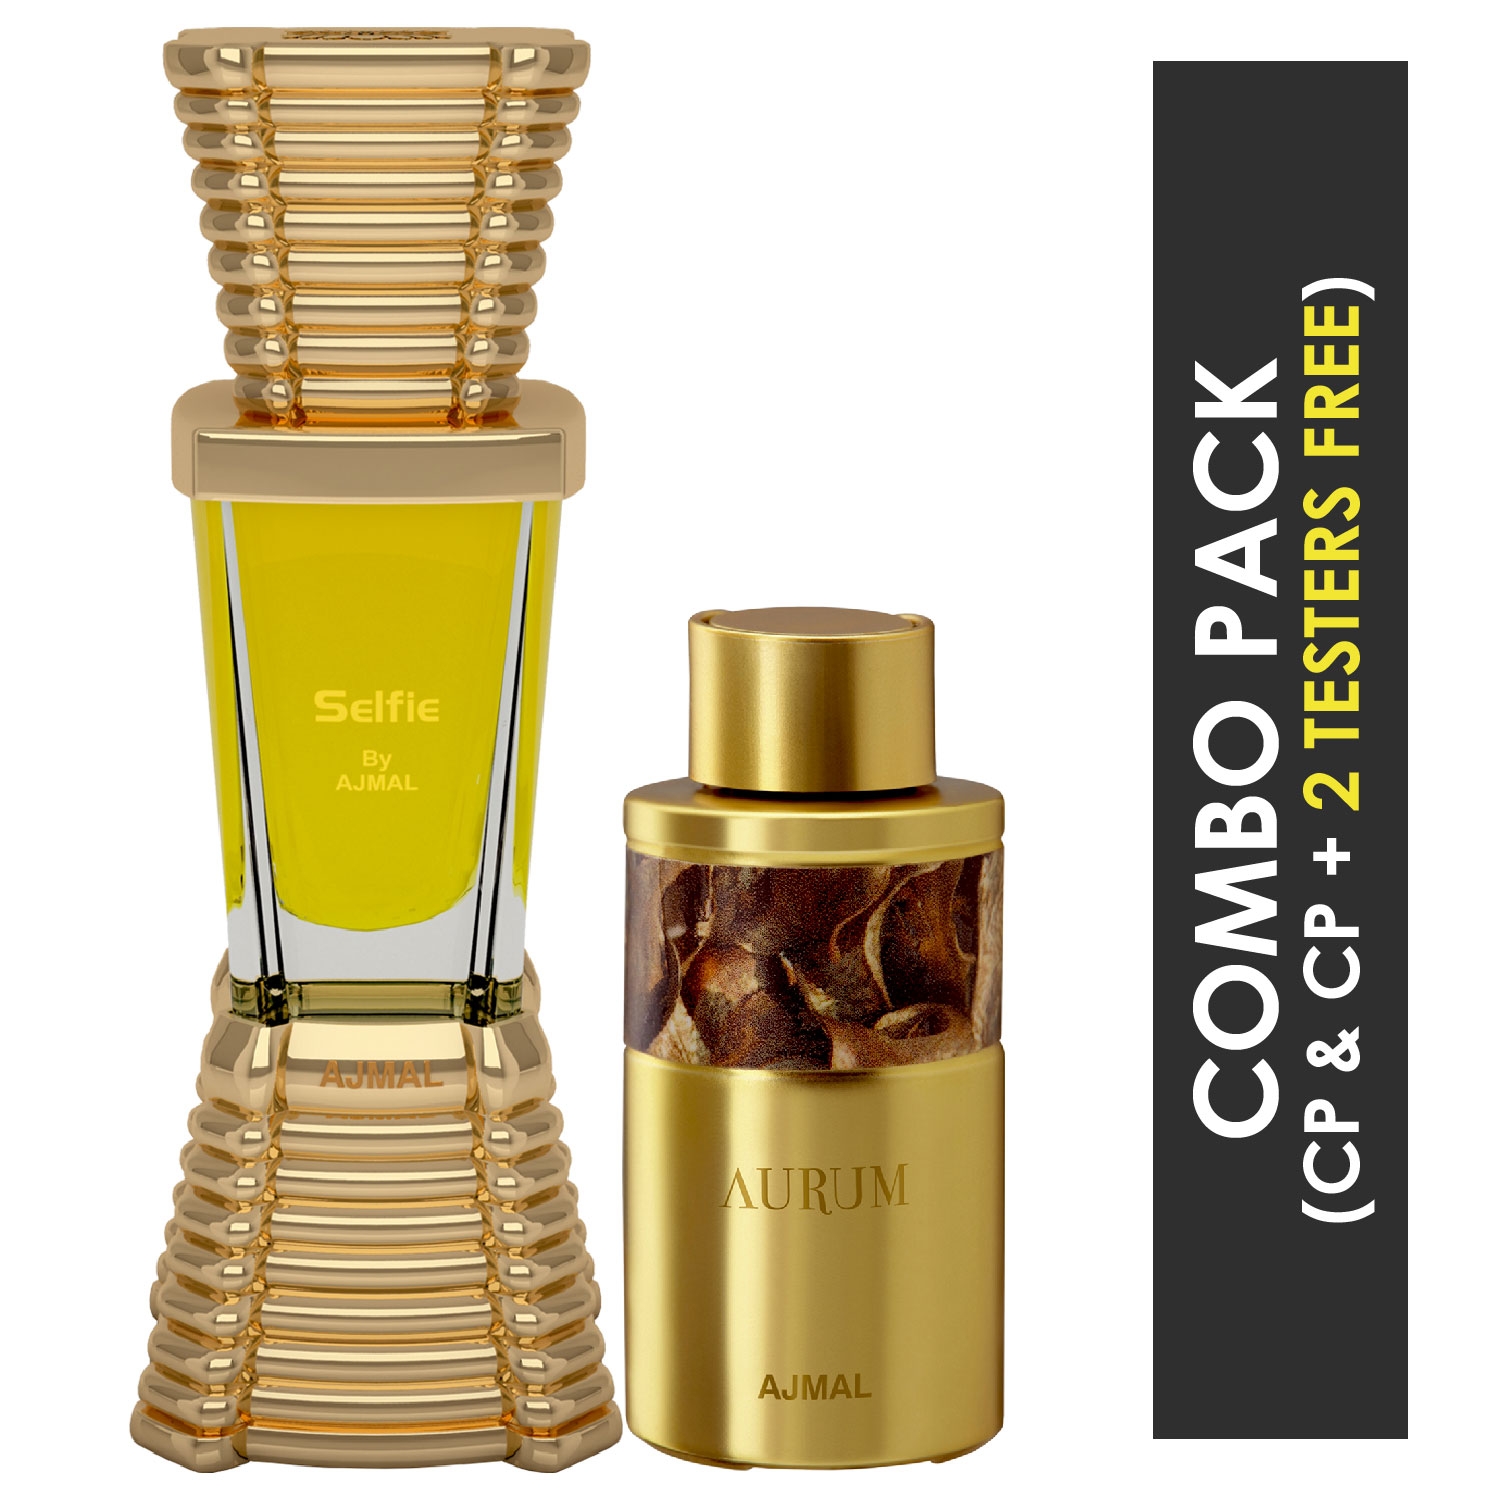 Ajmal | Ajmal Selfie Concentrated Perfume Oil Woody Aromatic Alcohol-free Attar 10ml for Men and Aurum Concentrated Perfume Oil Fruity Floral Alcohol-free Attar 10ml for Women + 2 Parfum Testers FREE